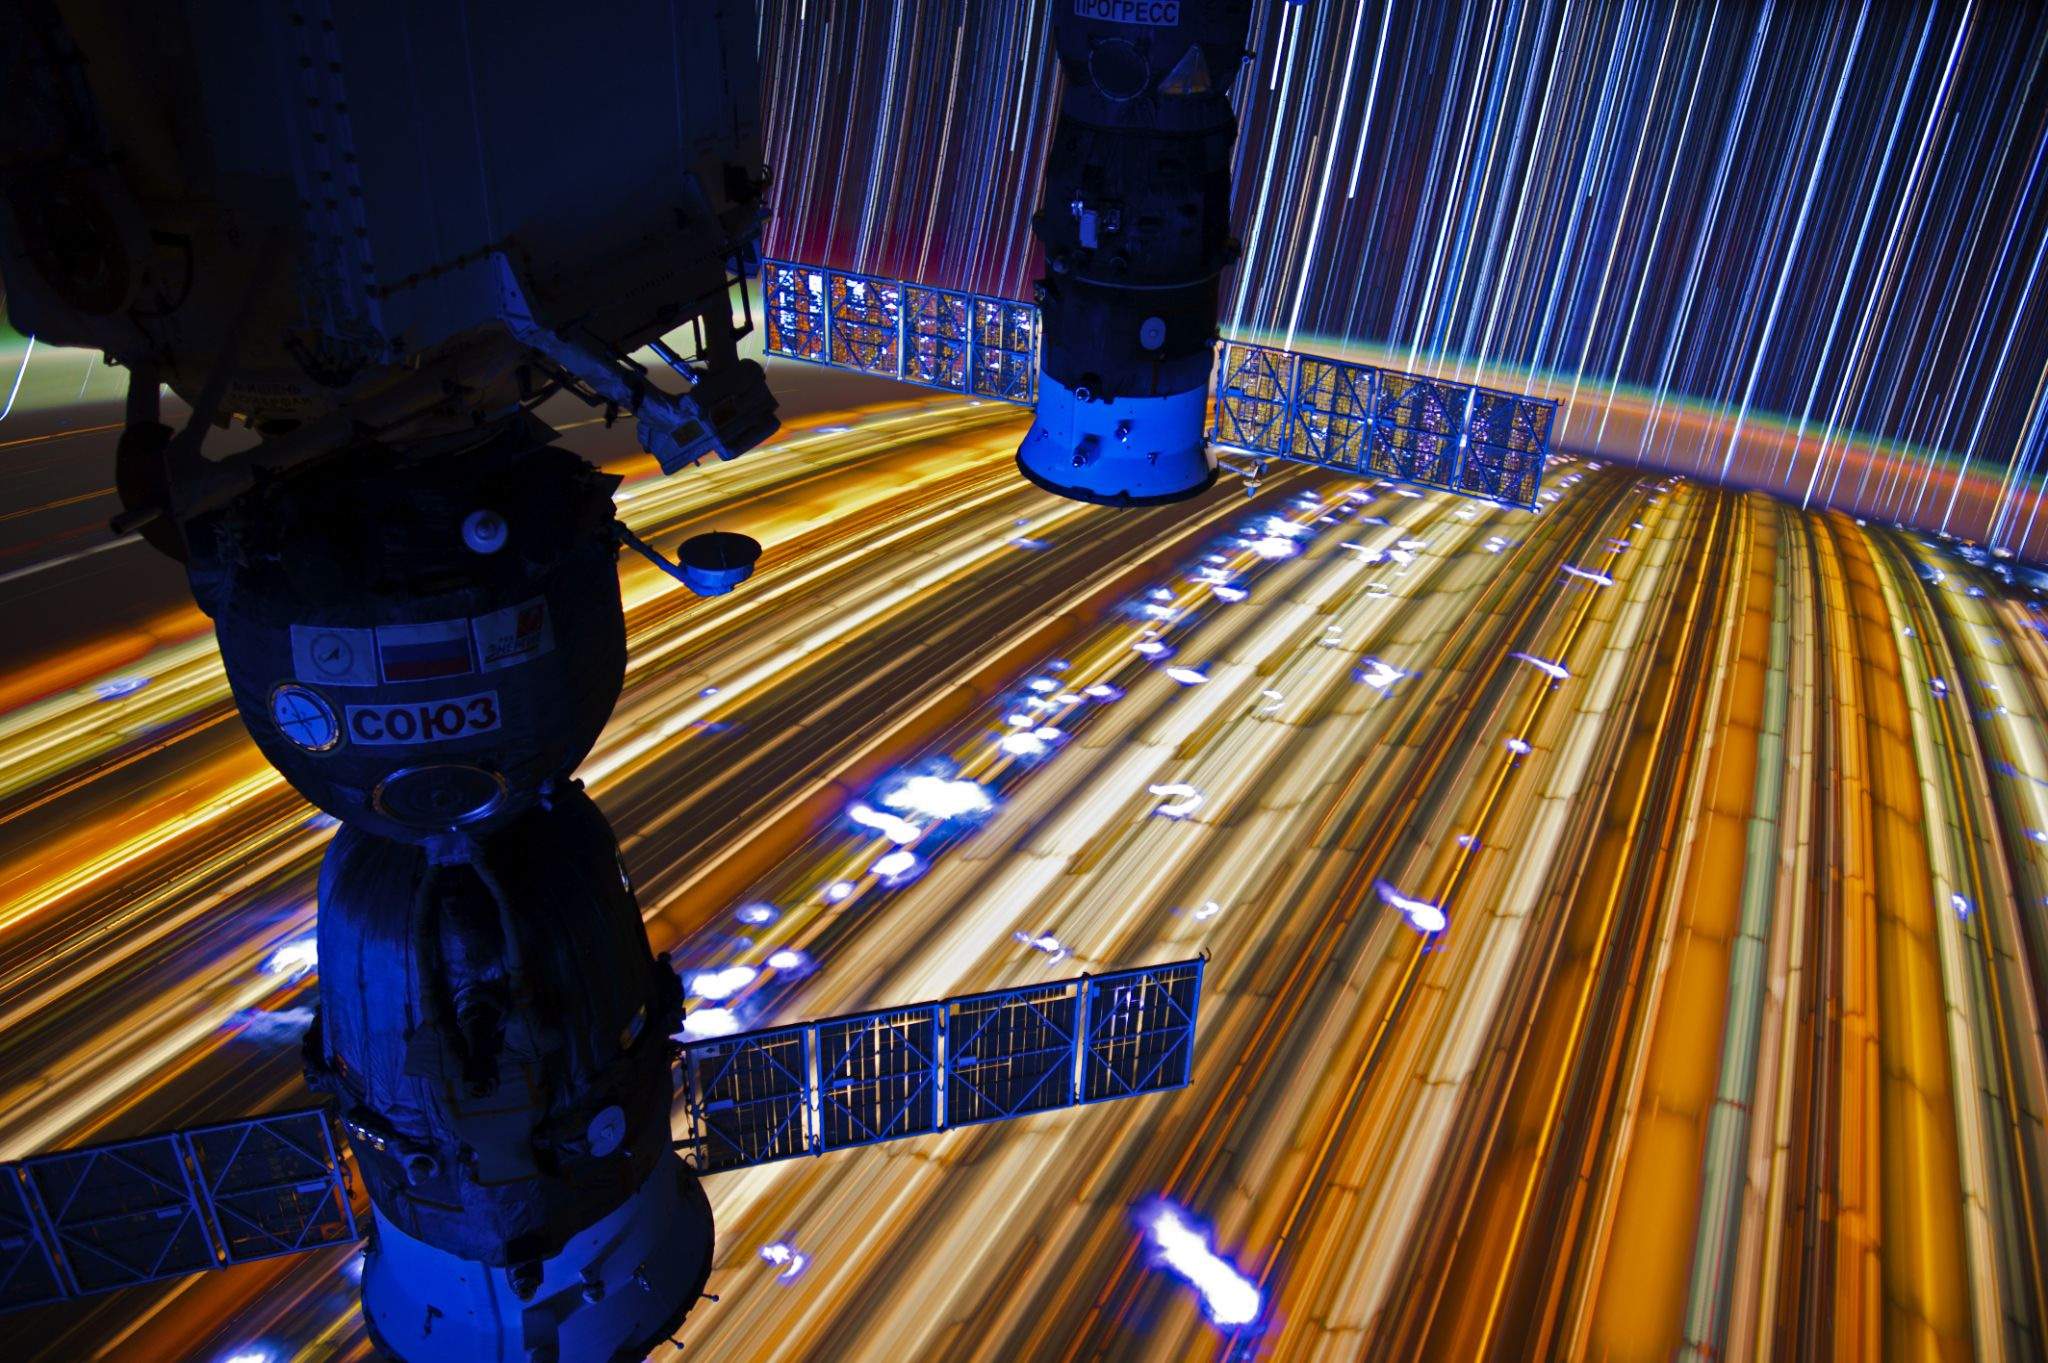 Astronaut Don Pettit shares a long exposure photo of Earth from the ISS and records himself as he repairs his watch in space (below) aboard the International Space Station. 